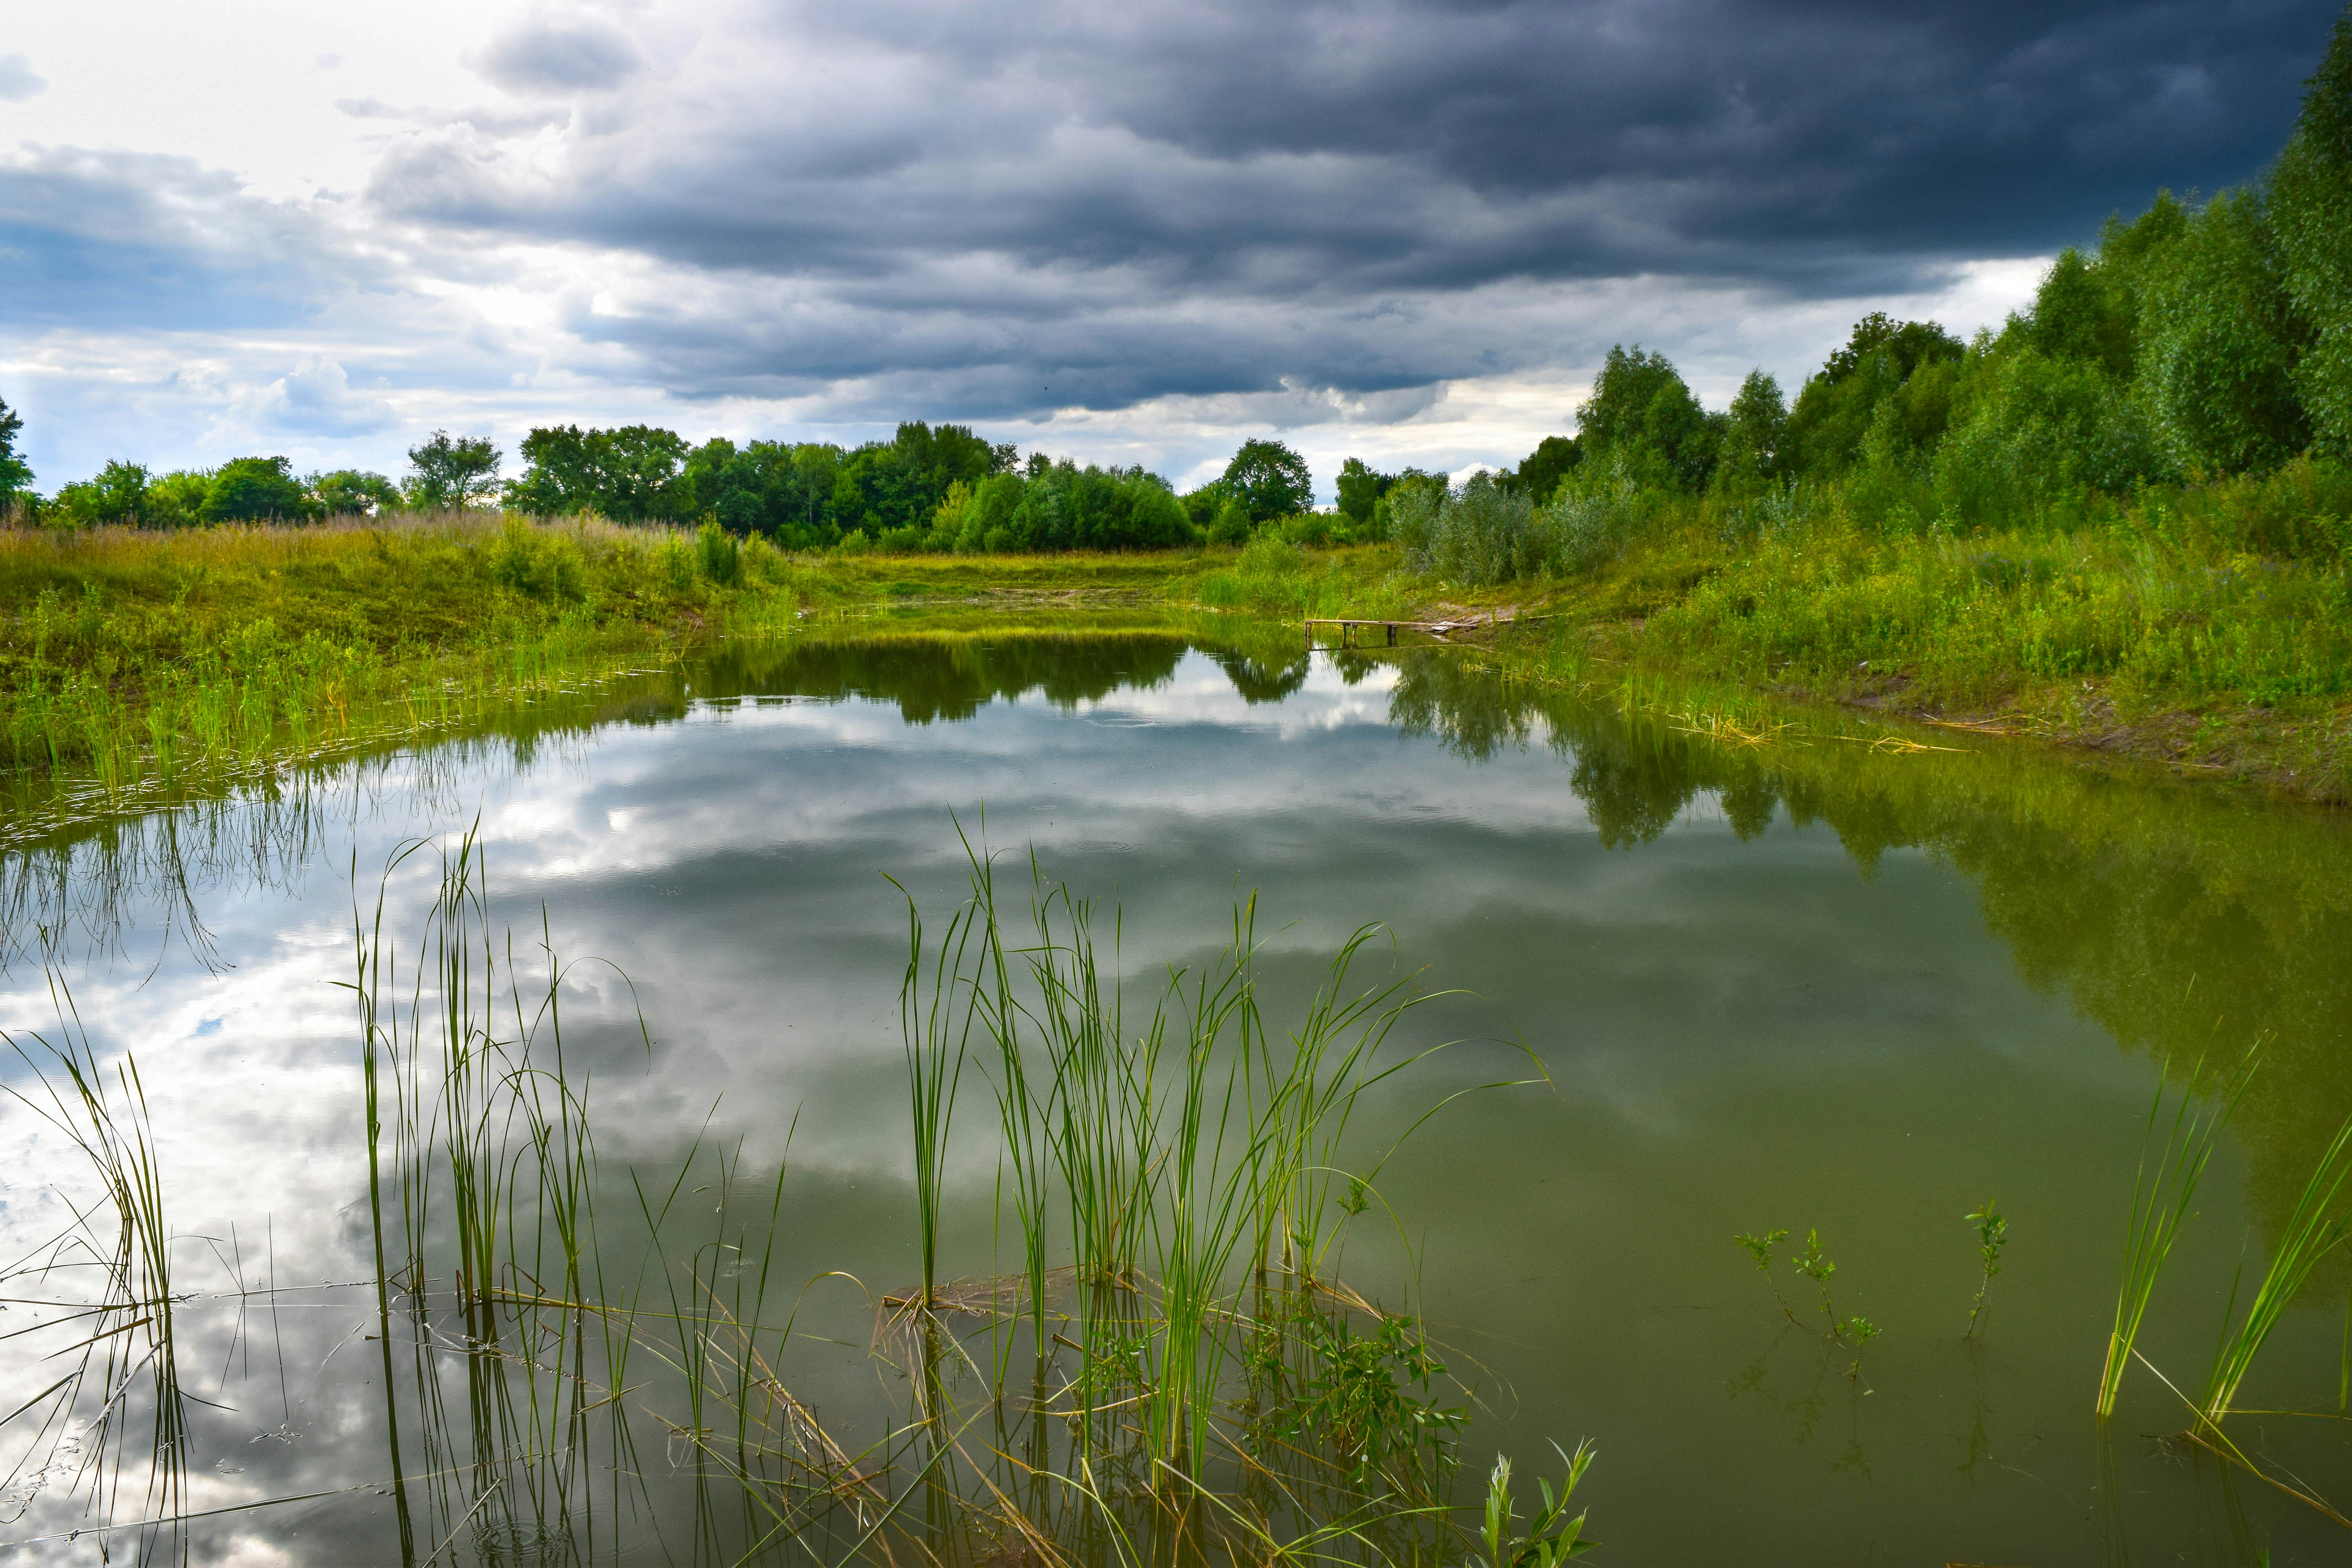 Storm cloud over the pond in the meadow